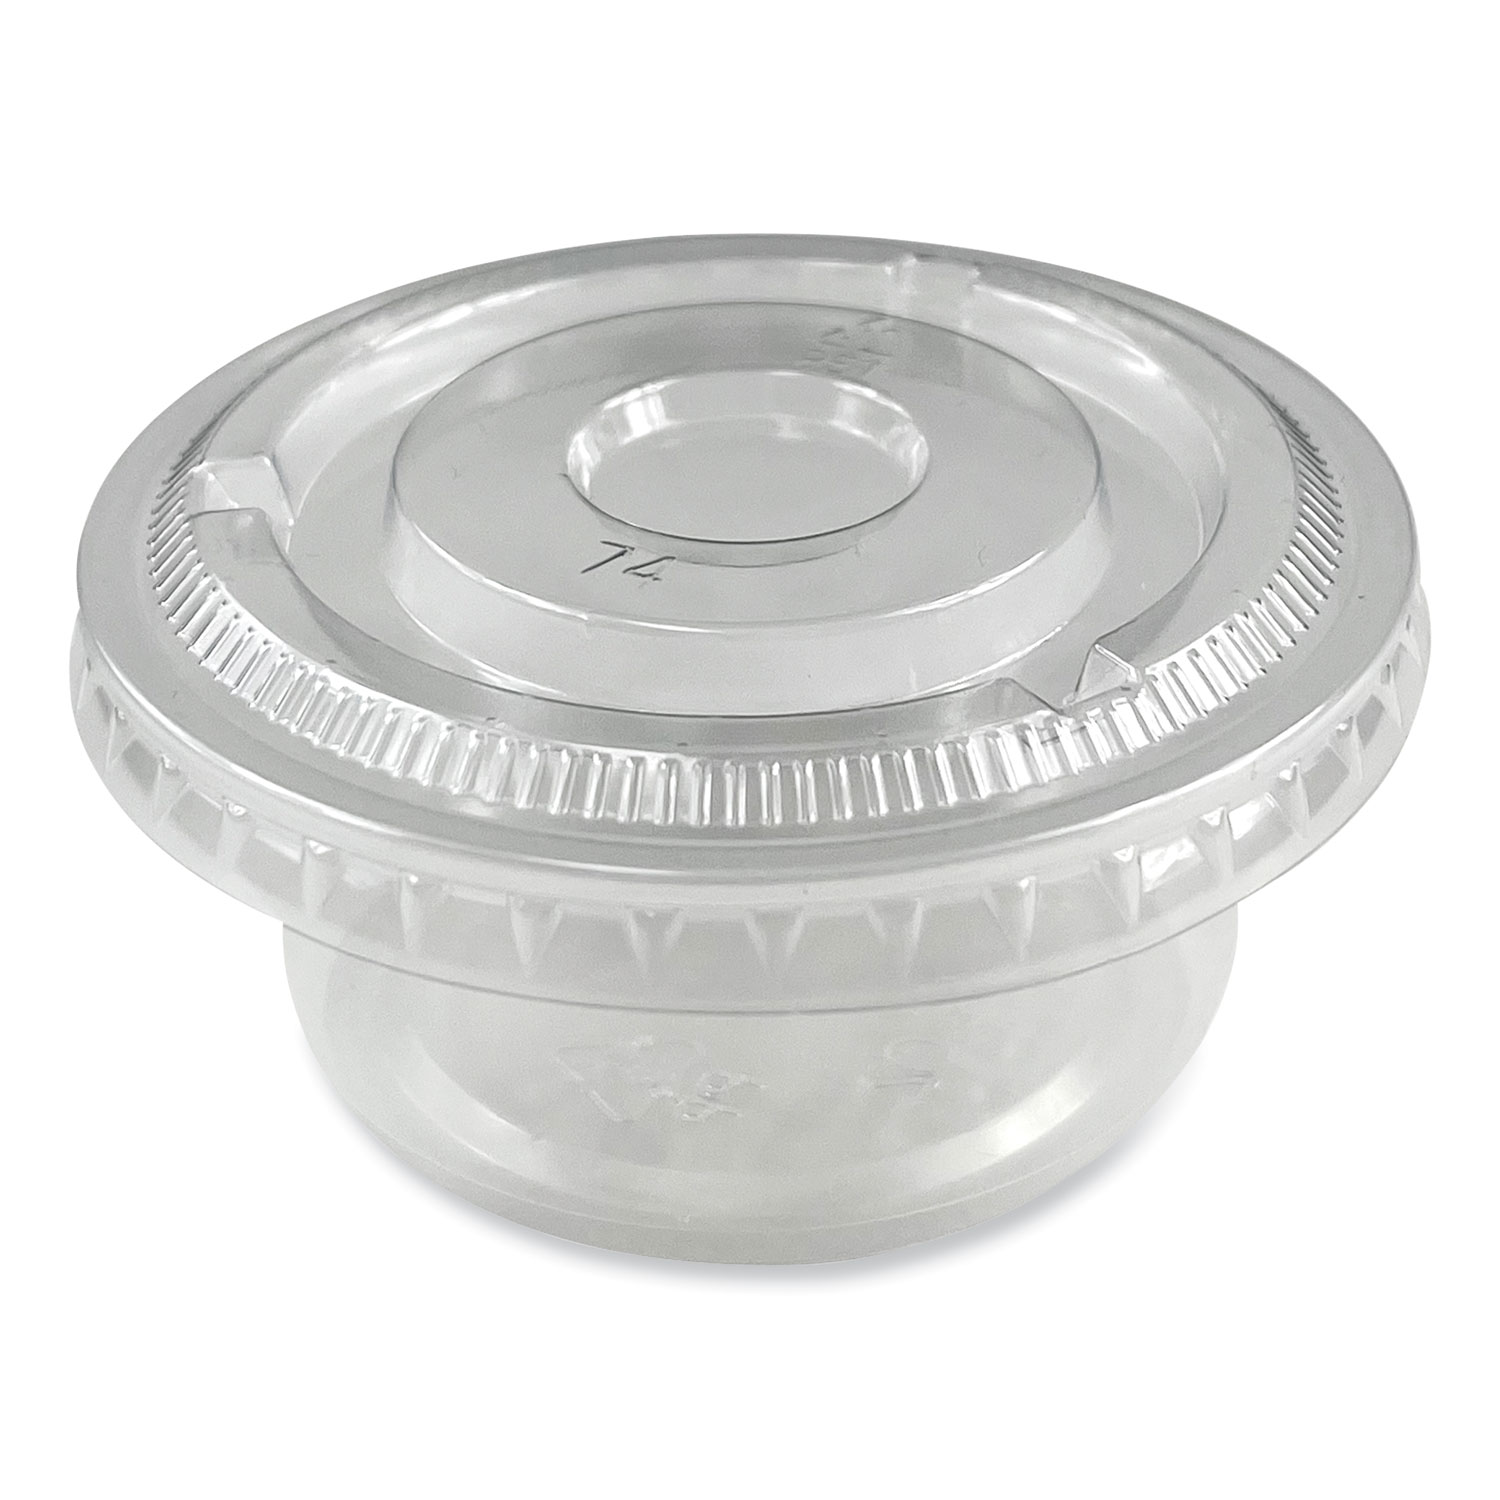 Plastic Portion Cups - 3.25oz PP Portion Cups - Clear - 2,500 ct